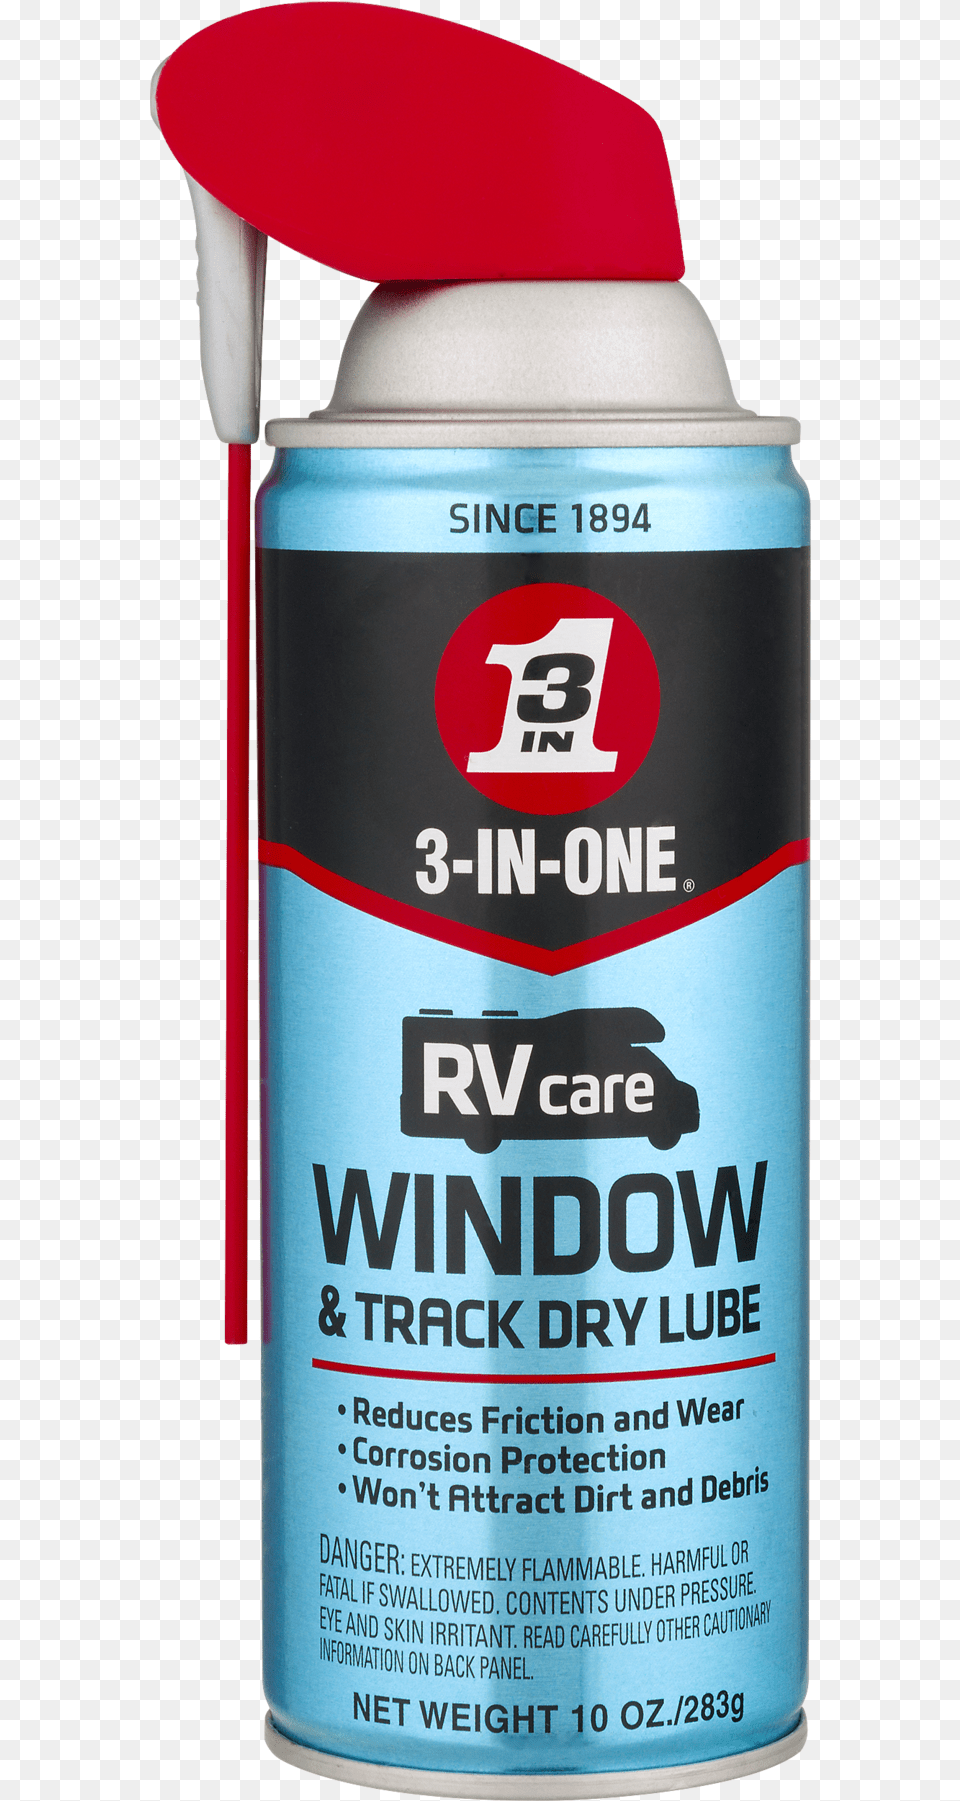 In One Rvcare Window Amp Track Dry Lube, Tin, Can, Spray Can, Cosmetics Free Transparent Png